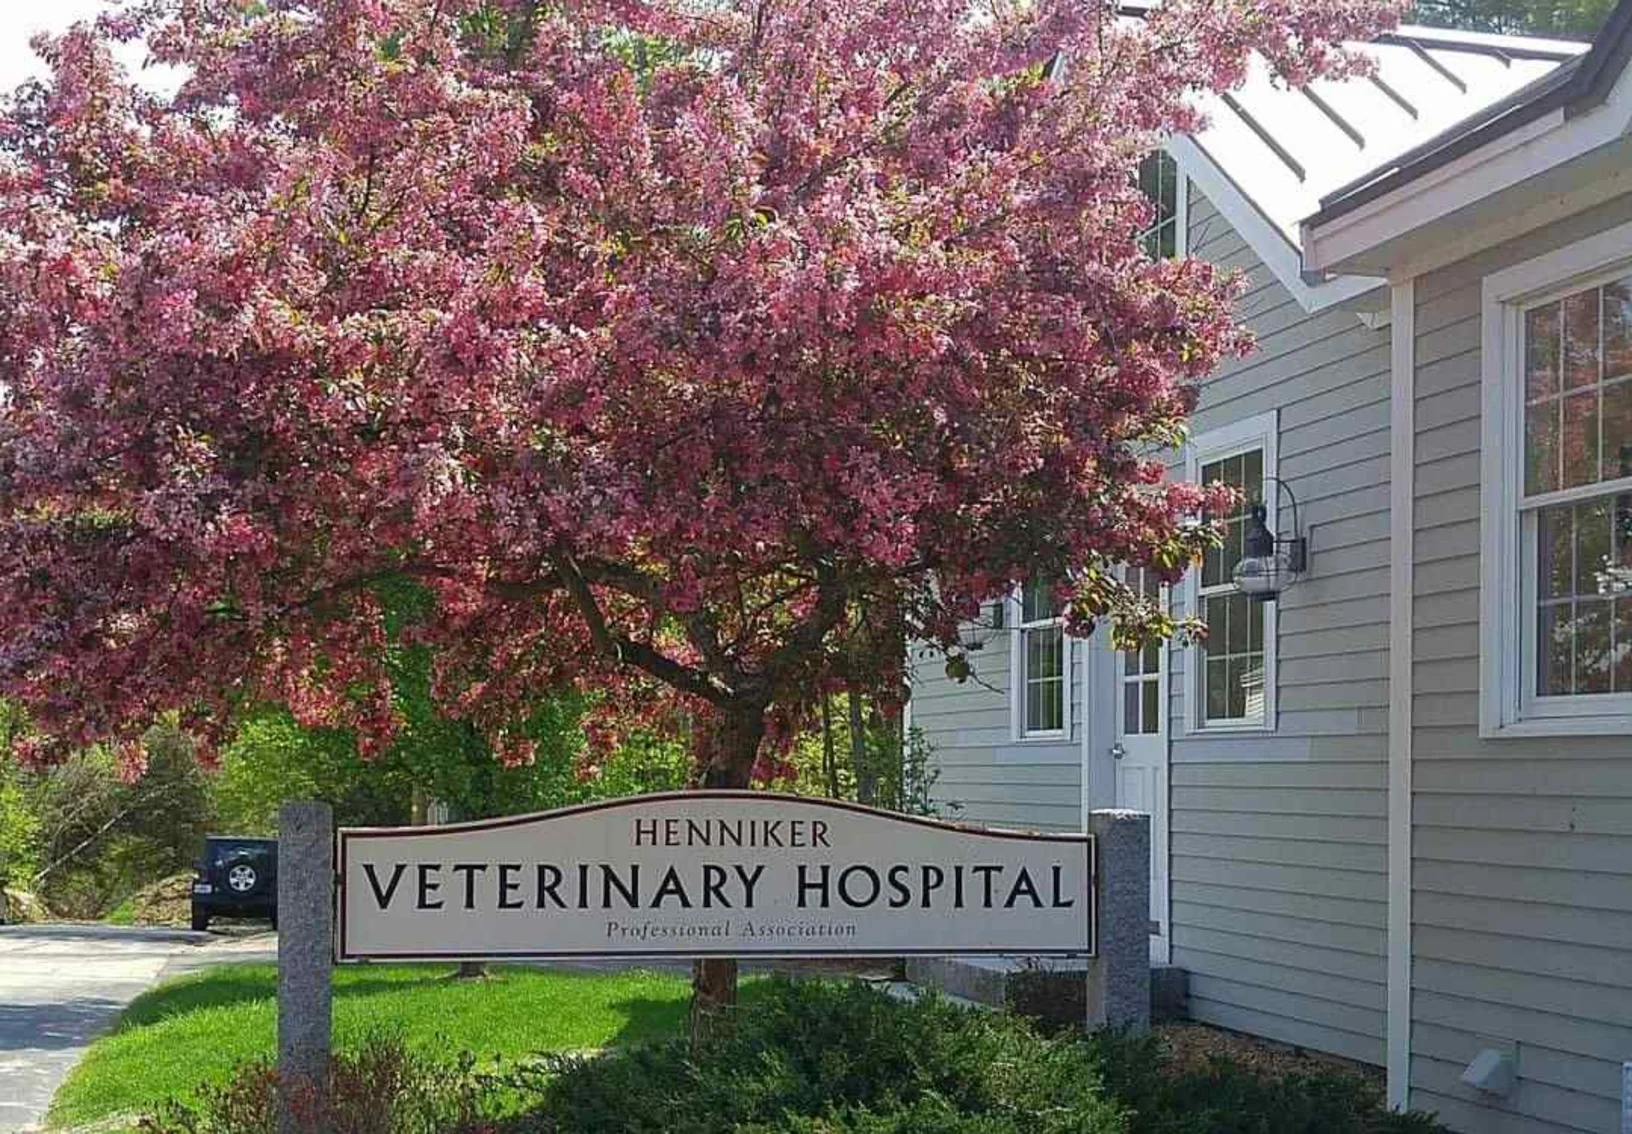 Pink trees in front of the clinic by the sign.